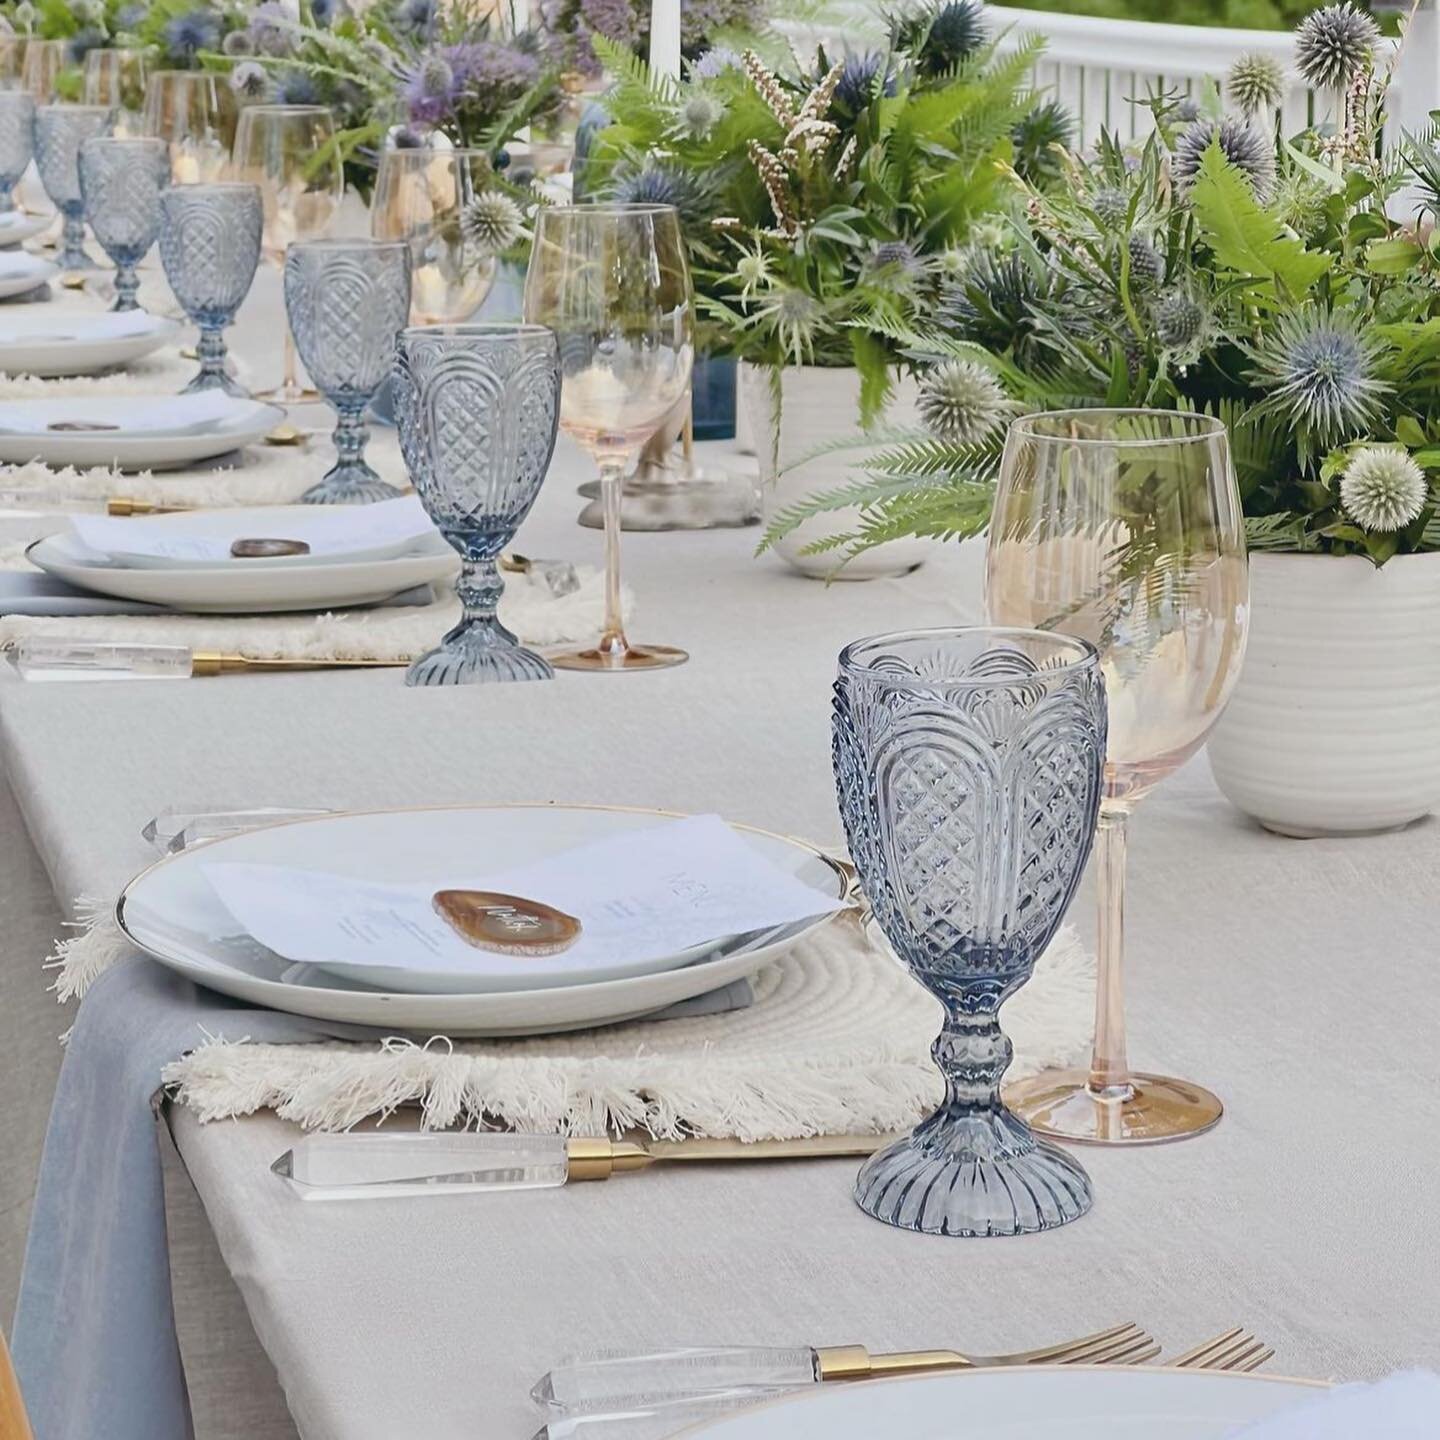 dinner in the Hamptons 🐚

Planning &amp; Design @nowyoucelebrate.events 

featuring sloan amber glassware, capri goblet in blue, isla fringe charger mat in ivory, kate gold rim dinnerware, liv acrylic gold flatware and velvet napkin in blue. 

ALL A